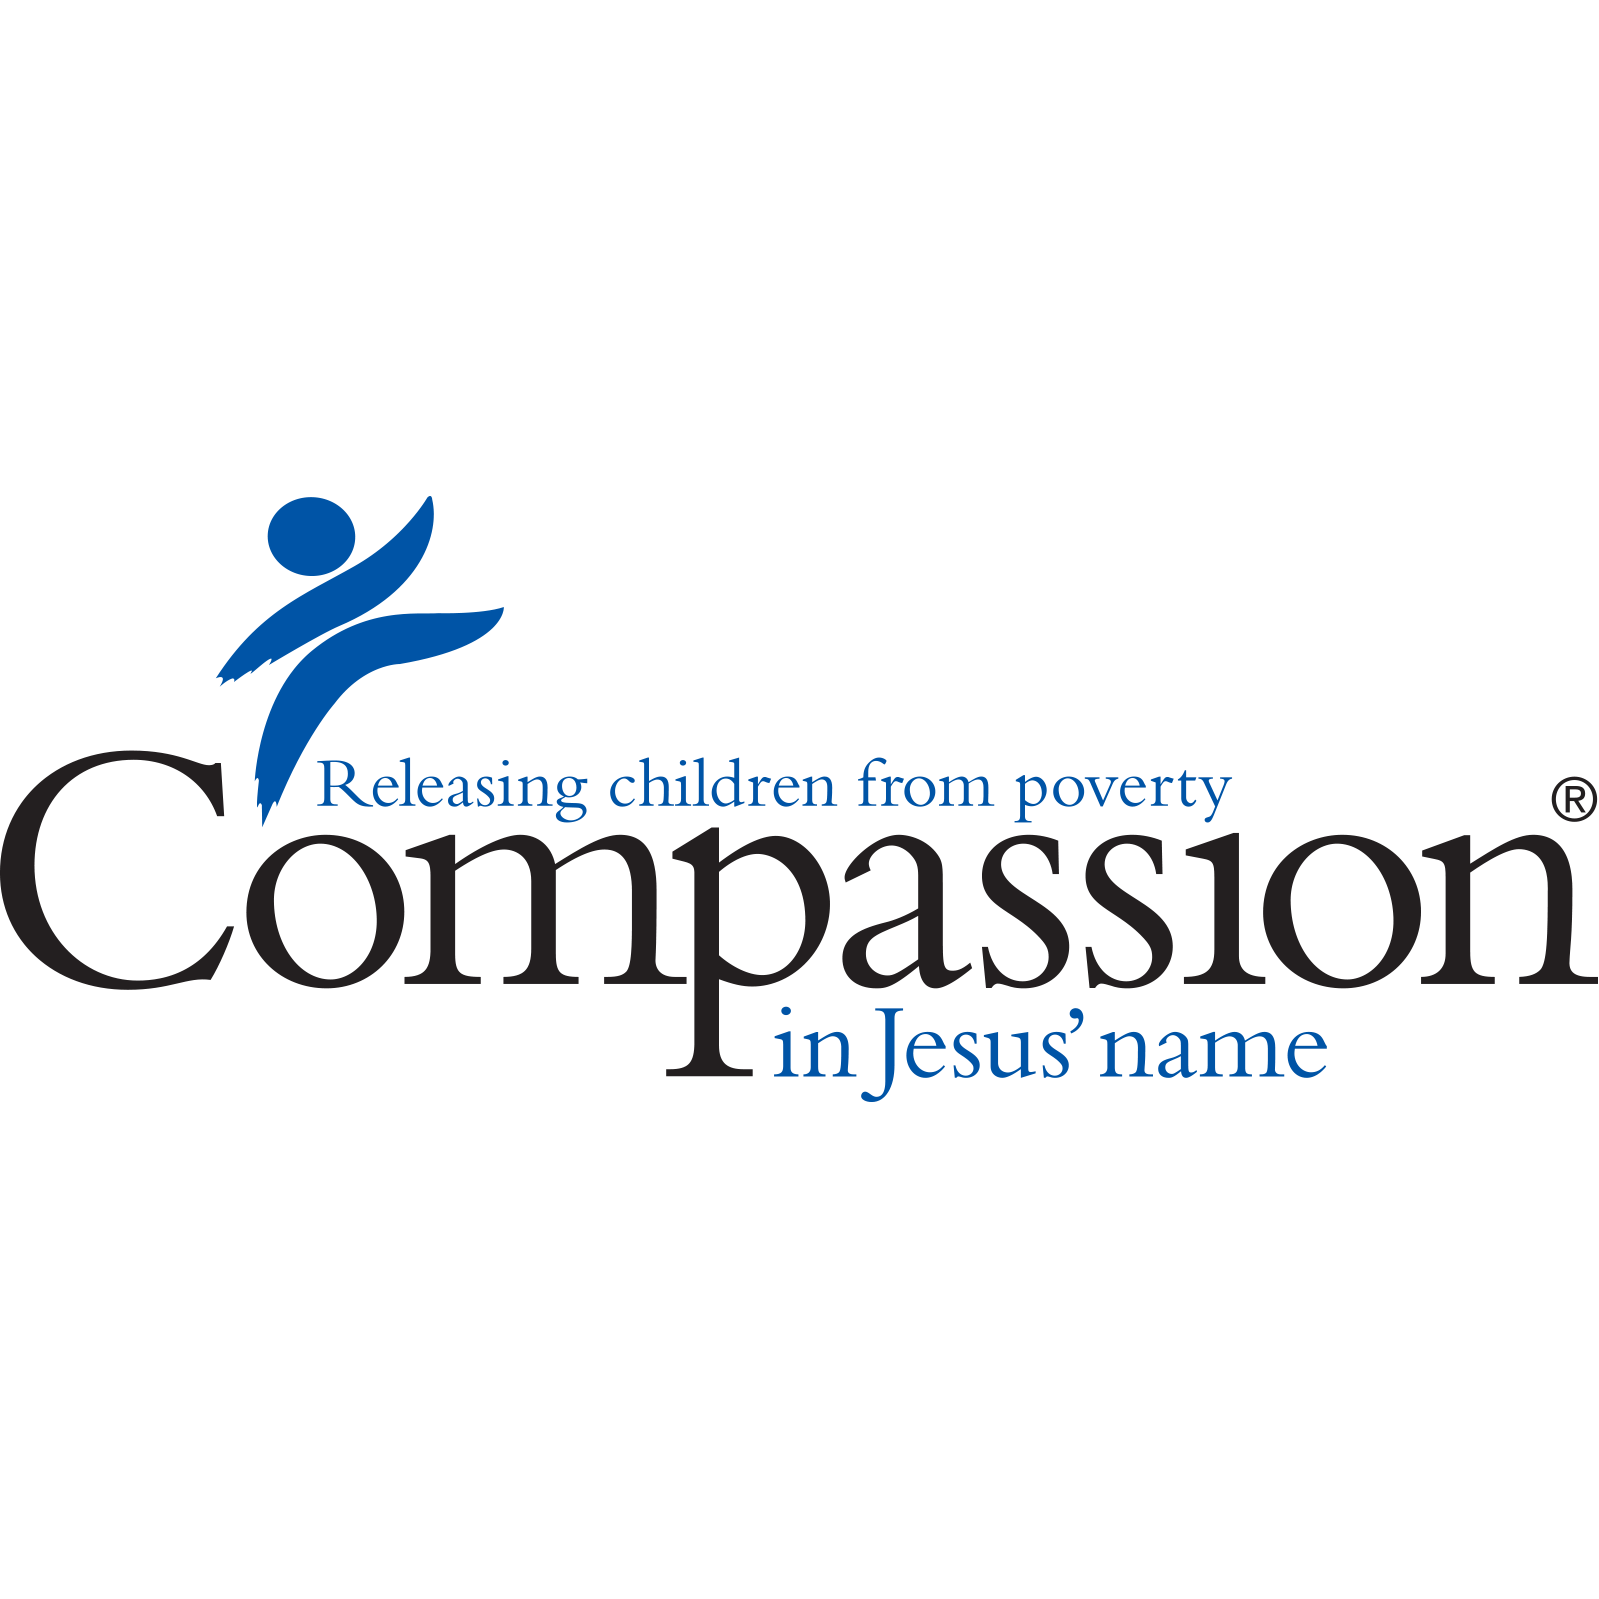 Compassion International logo - releasing children from poverty in Jesus' name